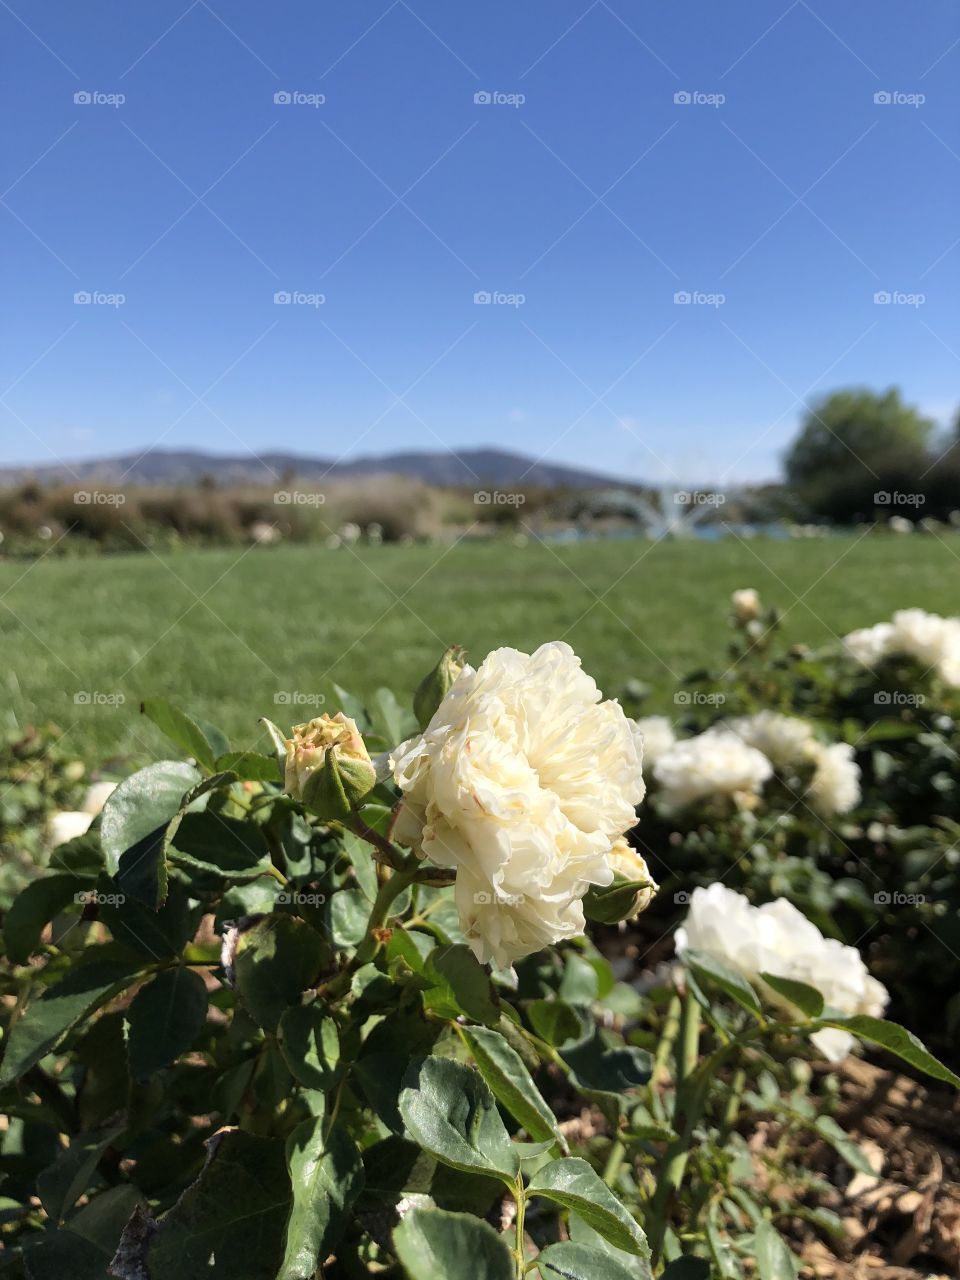 Small white rose framed by a lake in a vineyard on a glorious, sunny, autumn day in wine country: Temecula, California. Green grass, blue sky, mint lake, and white roses. 